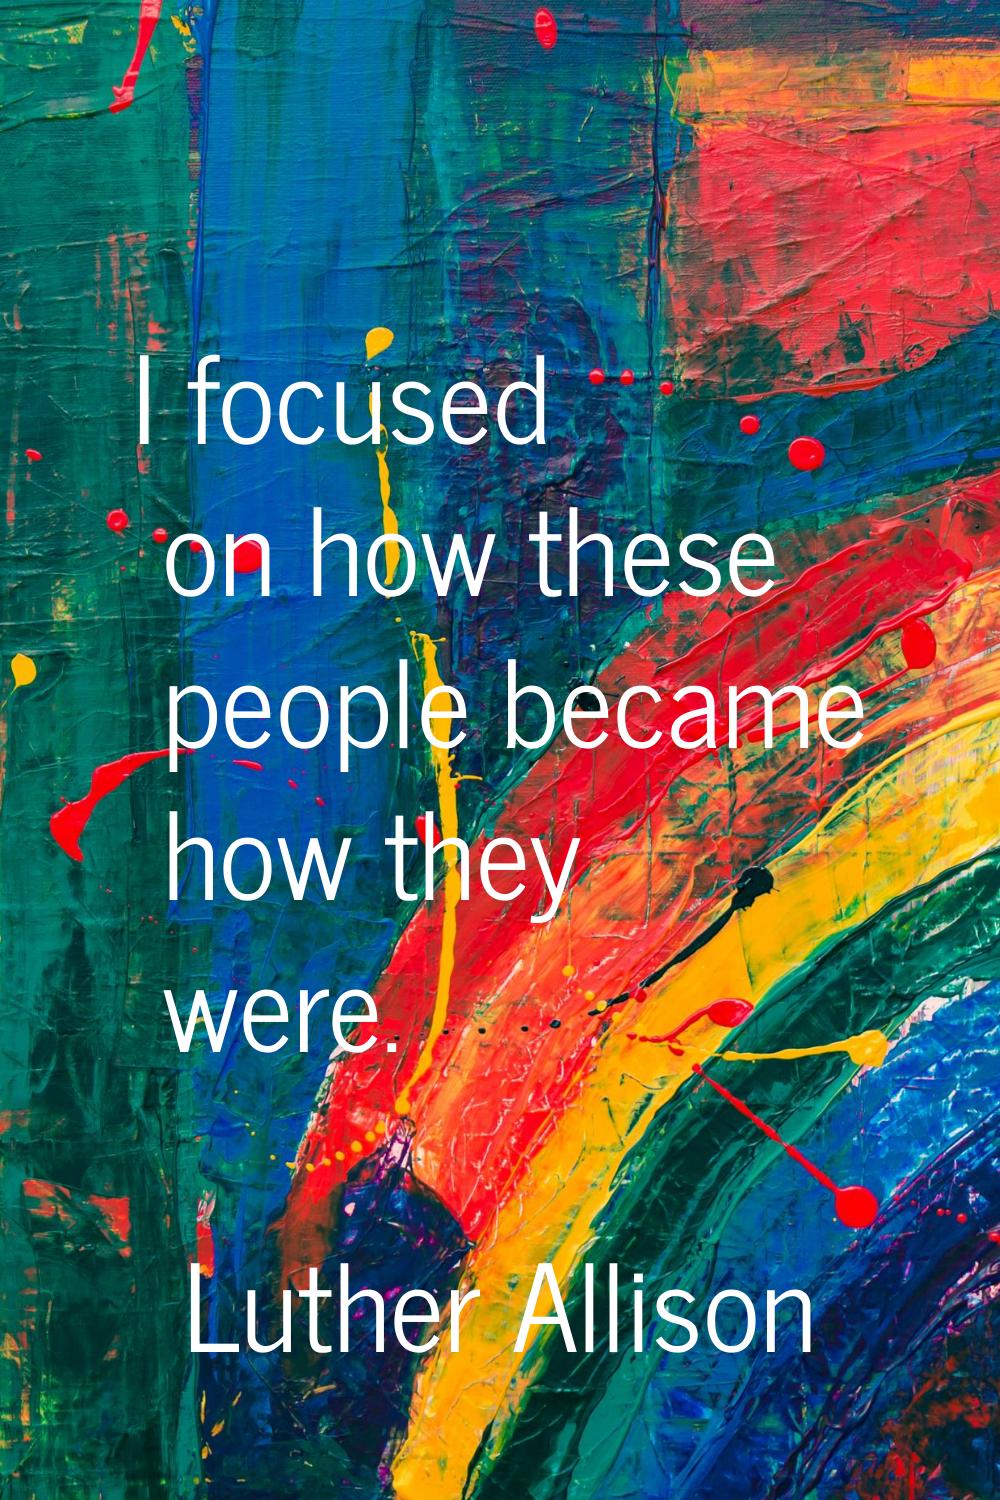 I focused on how these people became how they were.